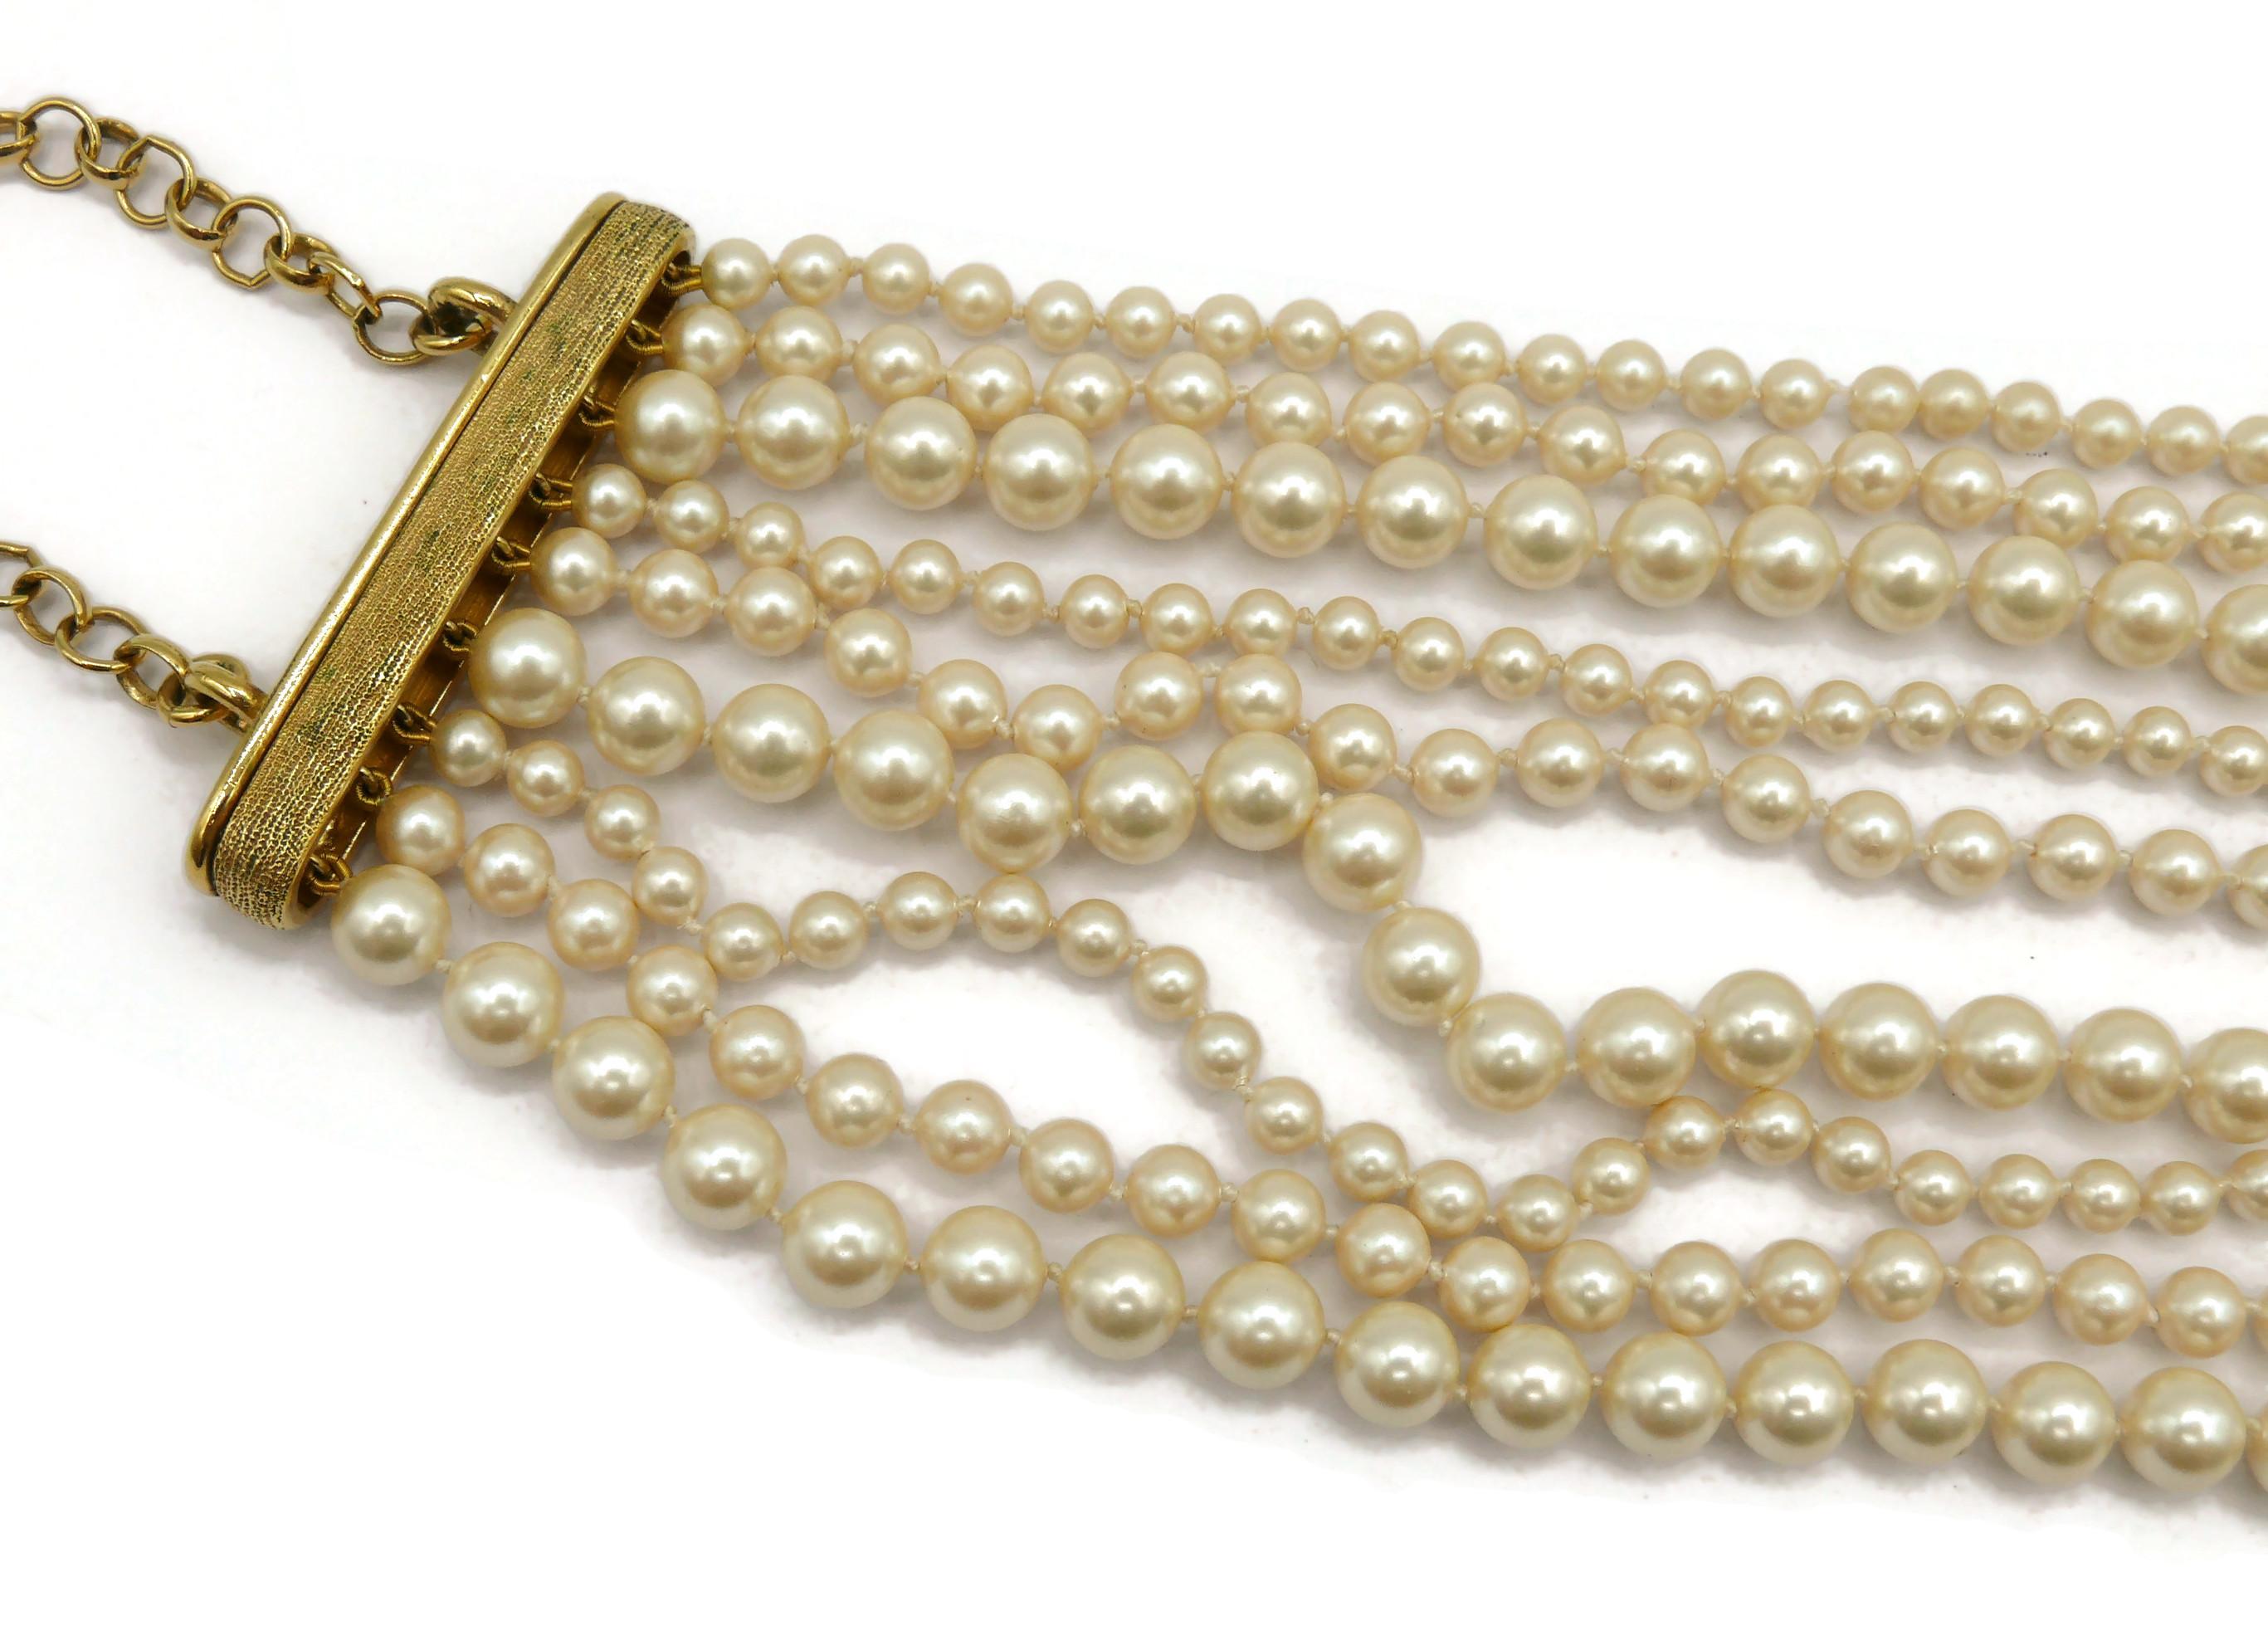 CHRISTIAN DIOR Vintage Multi-Strand Faux Pearl Necklace For Sale 3